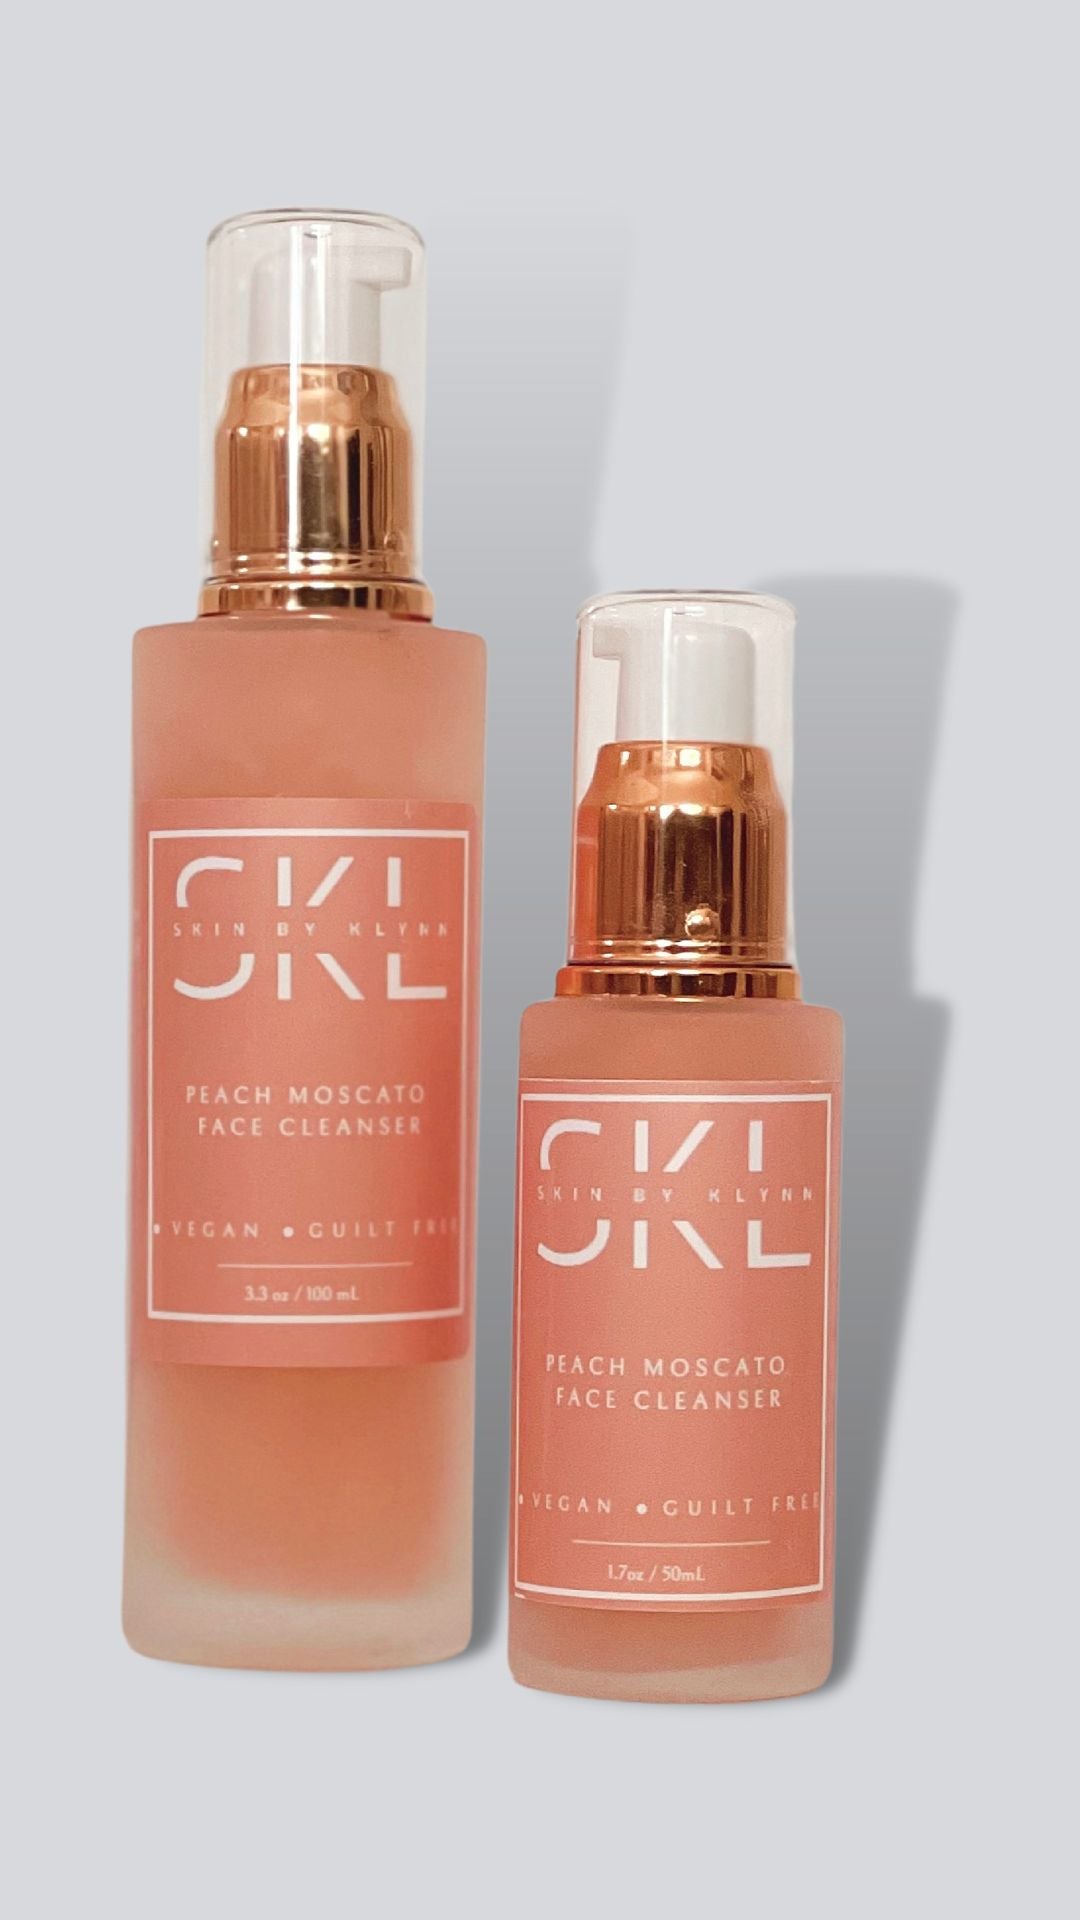 Peach Moscato Cleanser